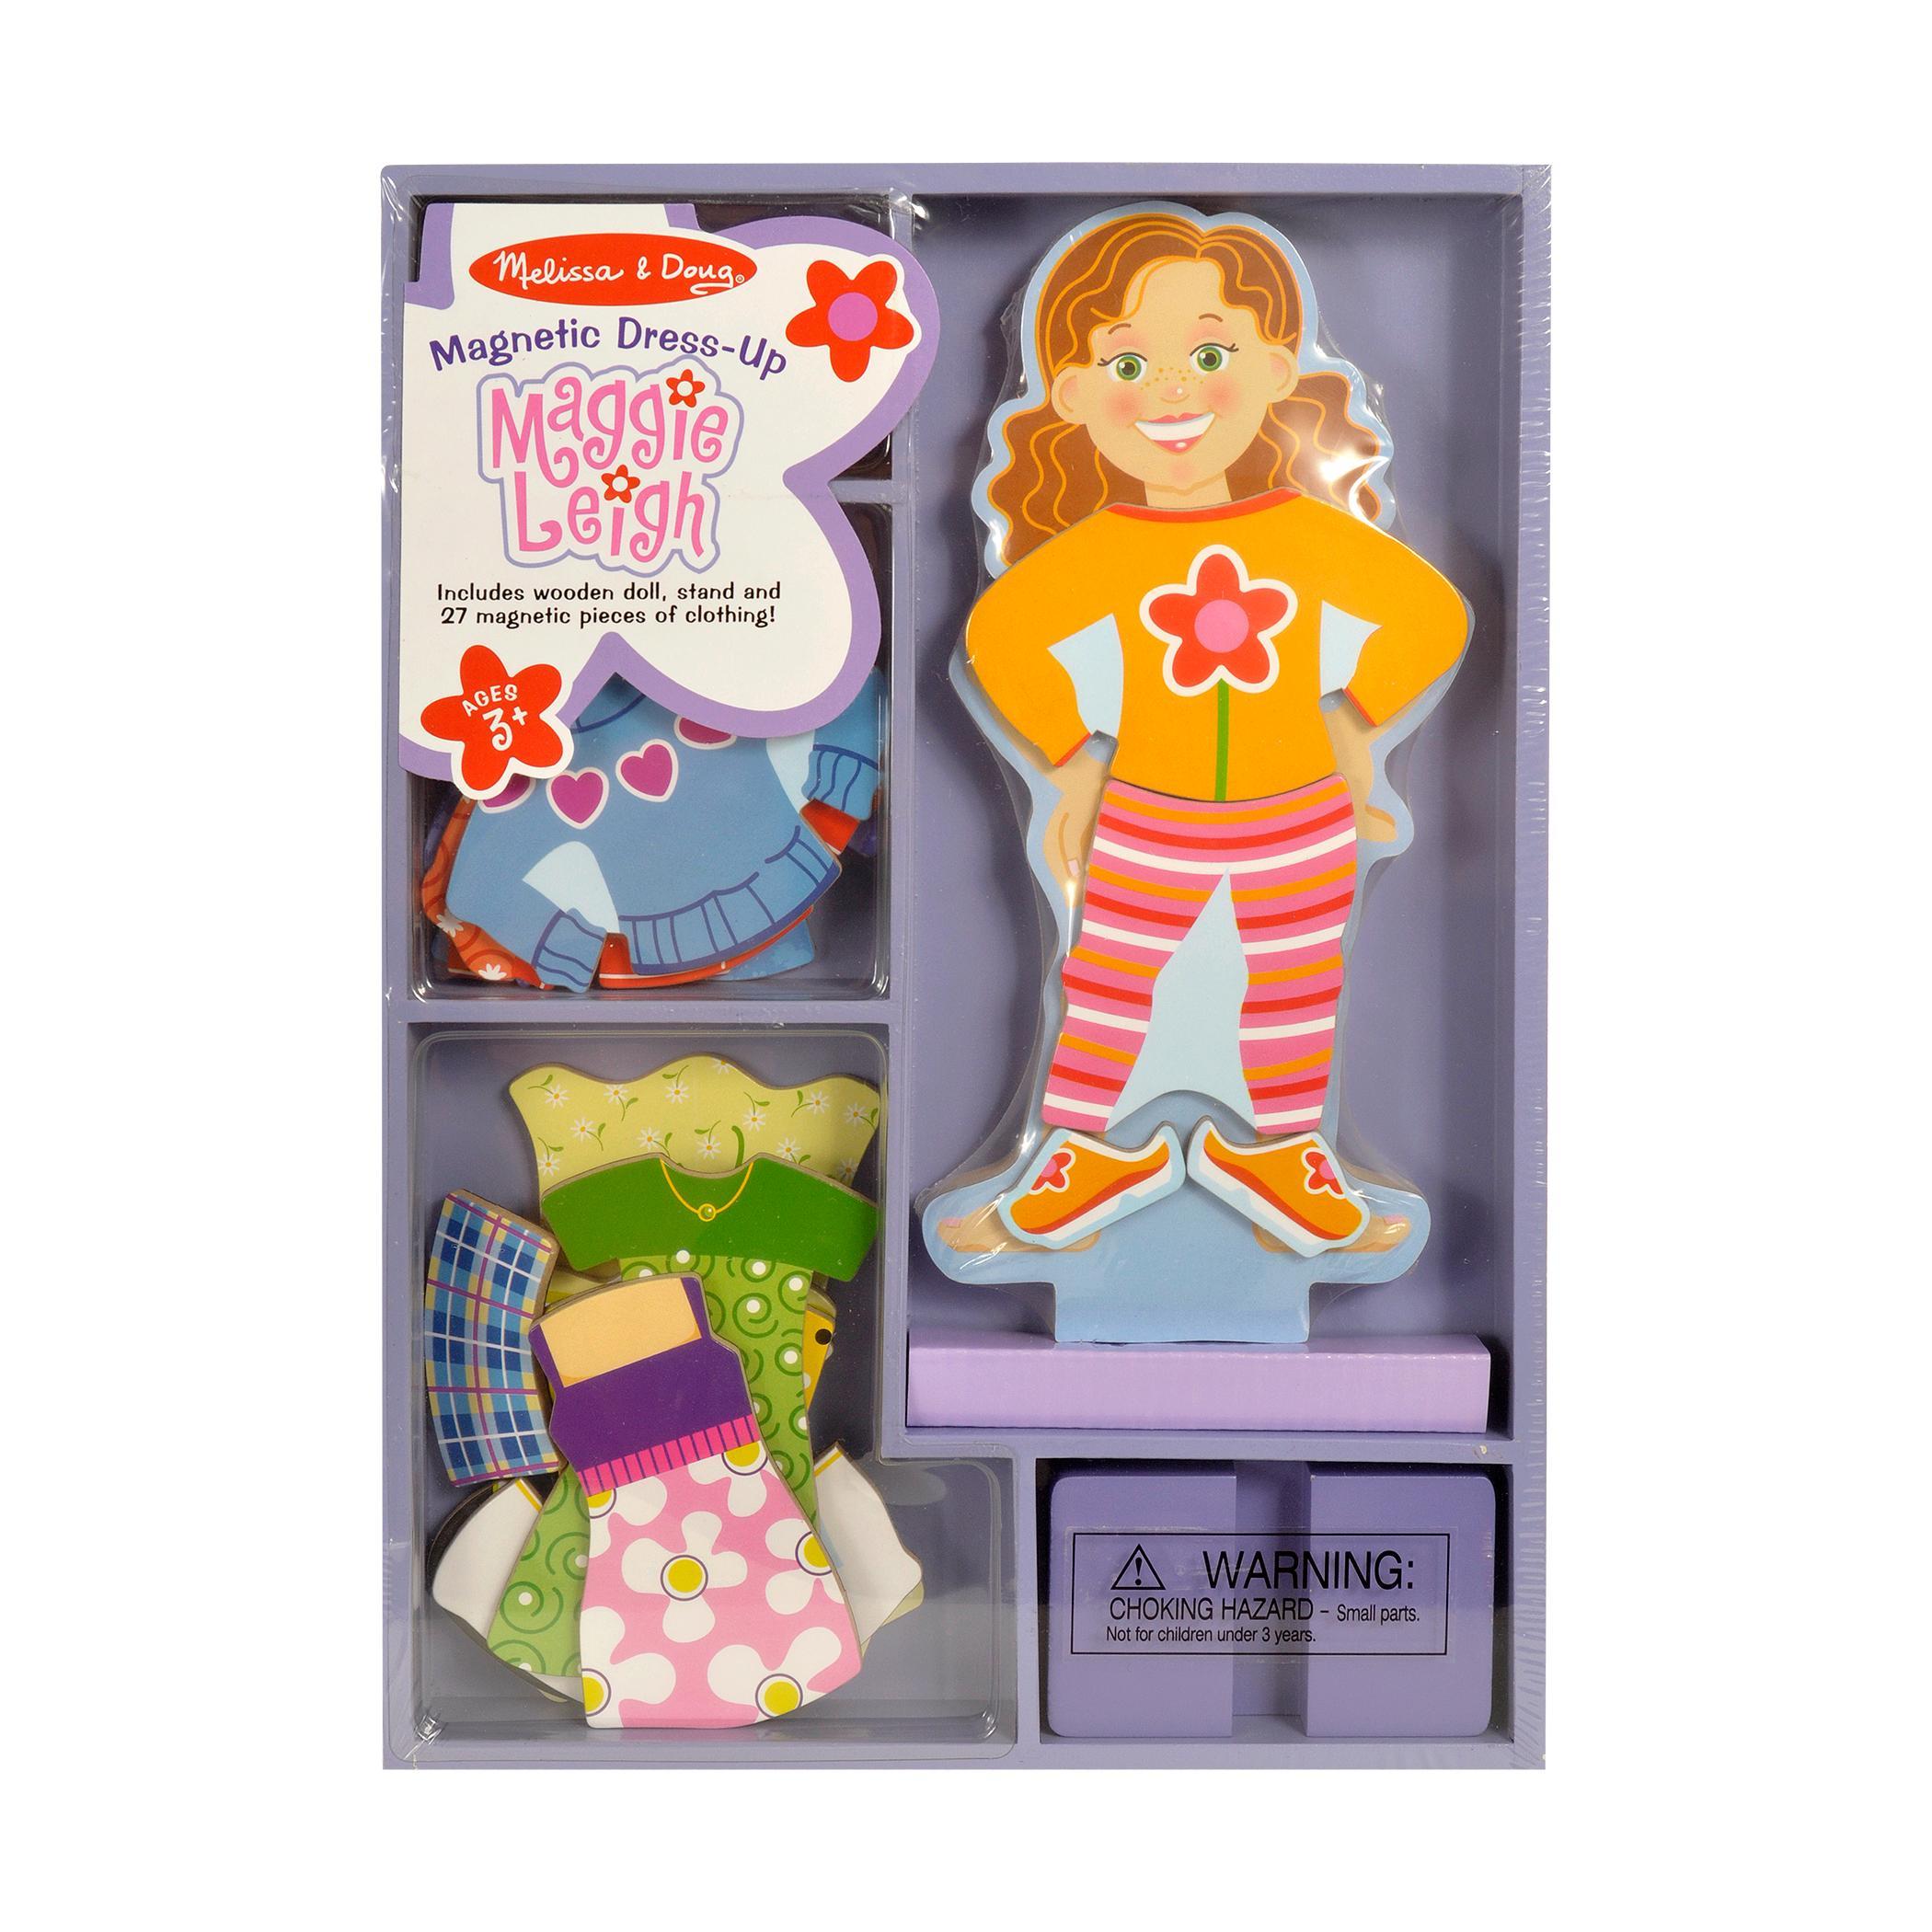 dolls with magnetic clothes